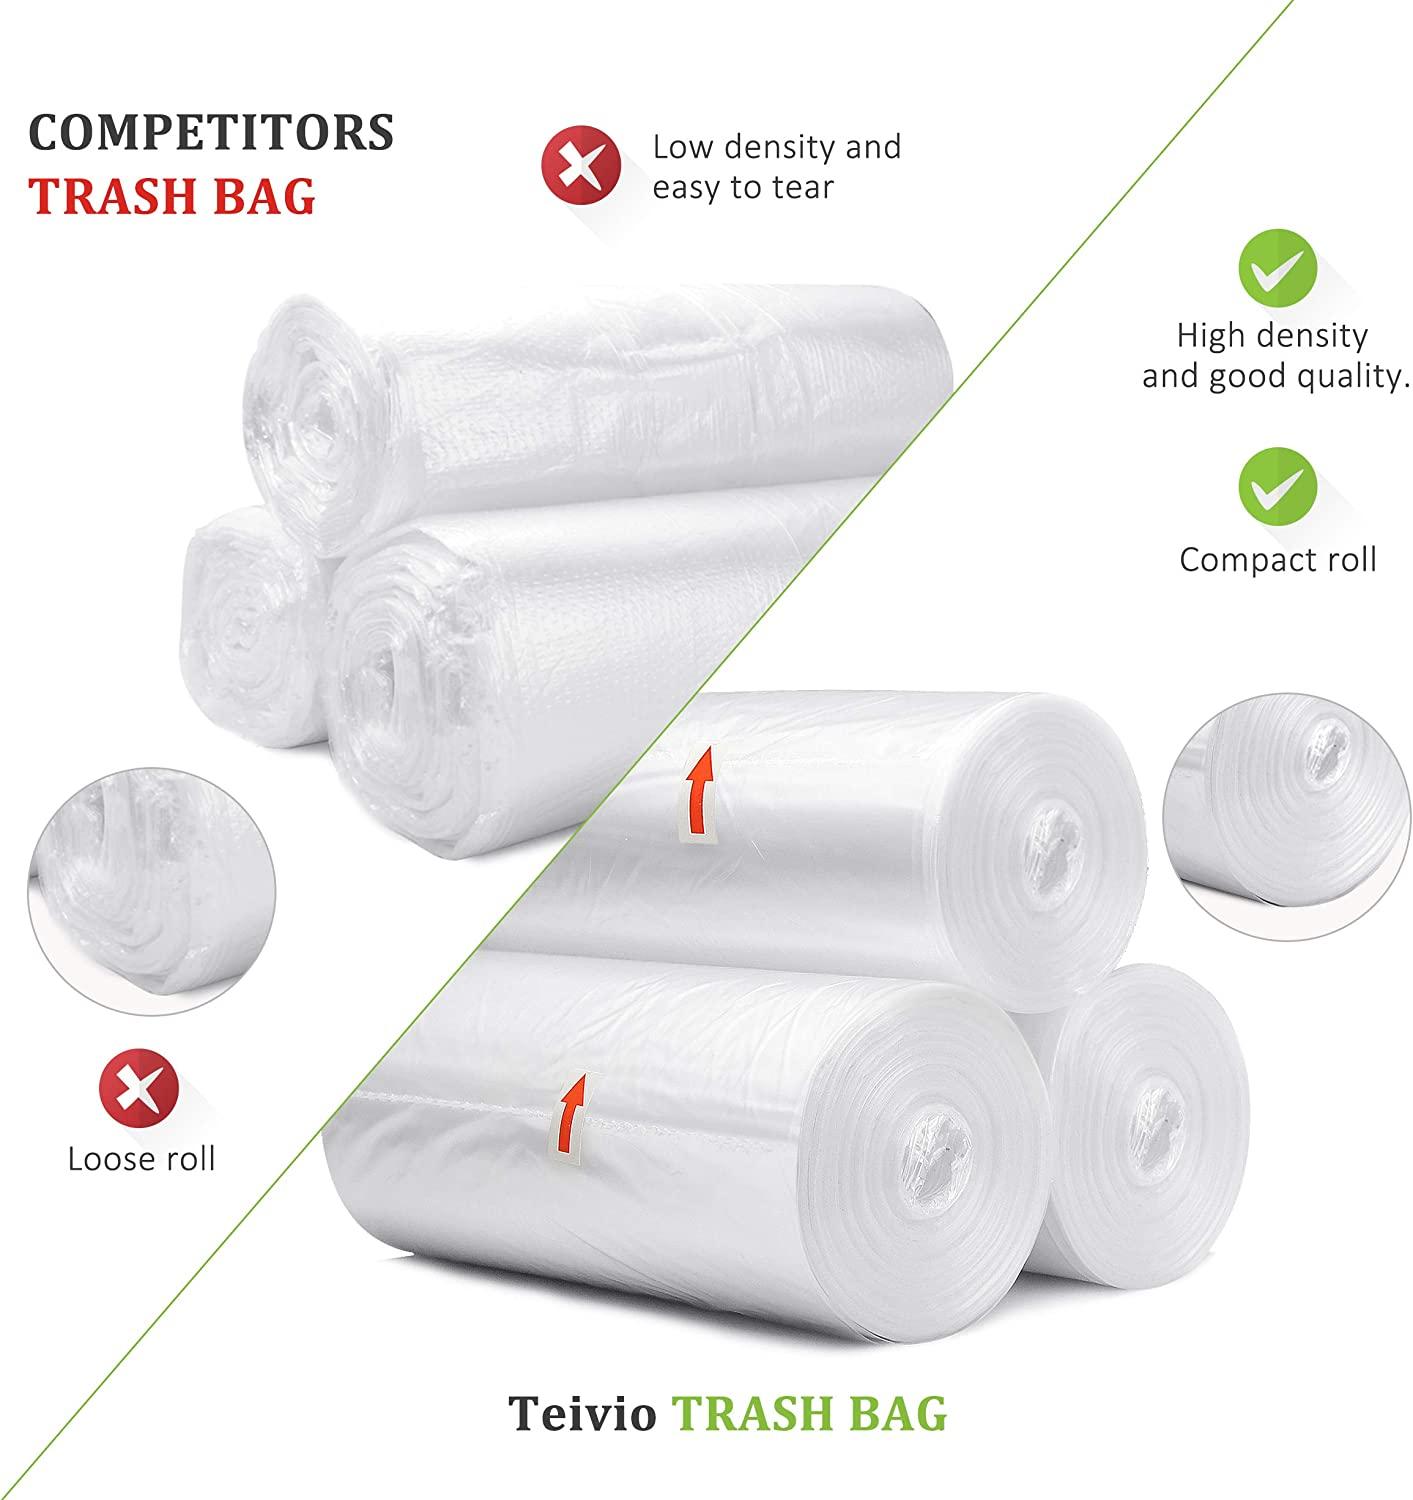 4 Gallon 150 Counts Strong Trash Bags Garbage Bags by RayPard, fit 12-15  Liter, 3,3.5-4.5 Gal trash Bin Liners for Home Office Kitchen Bathroom